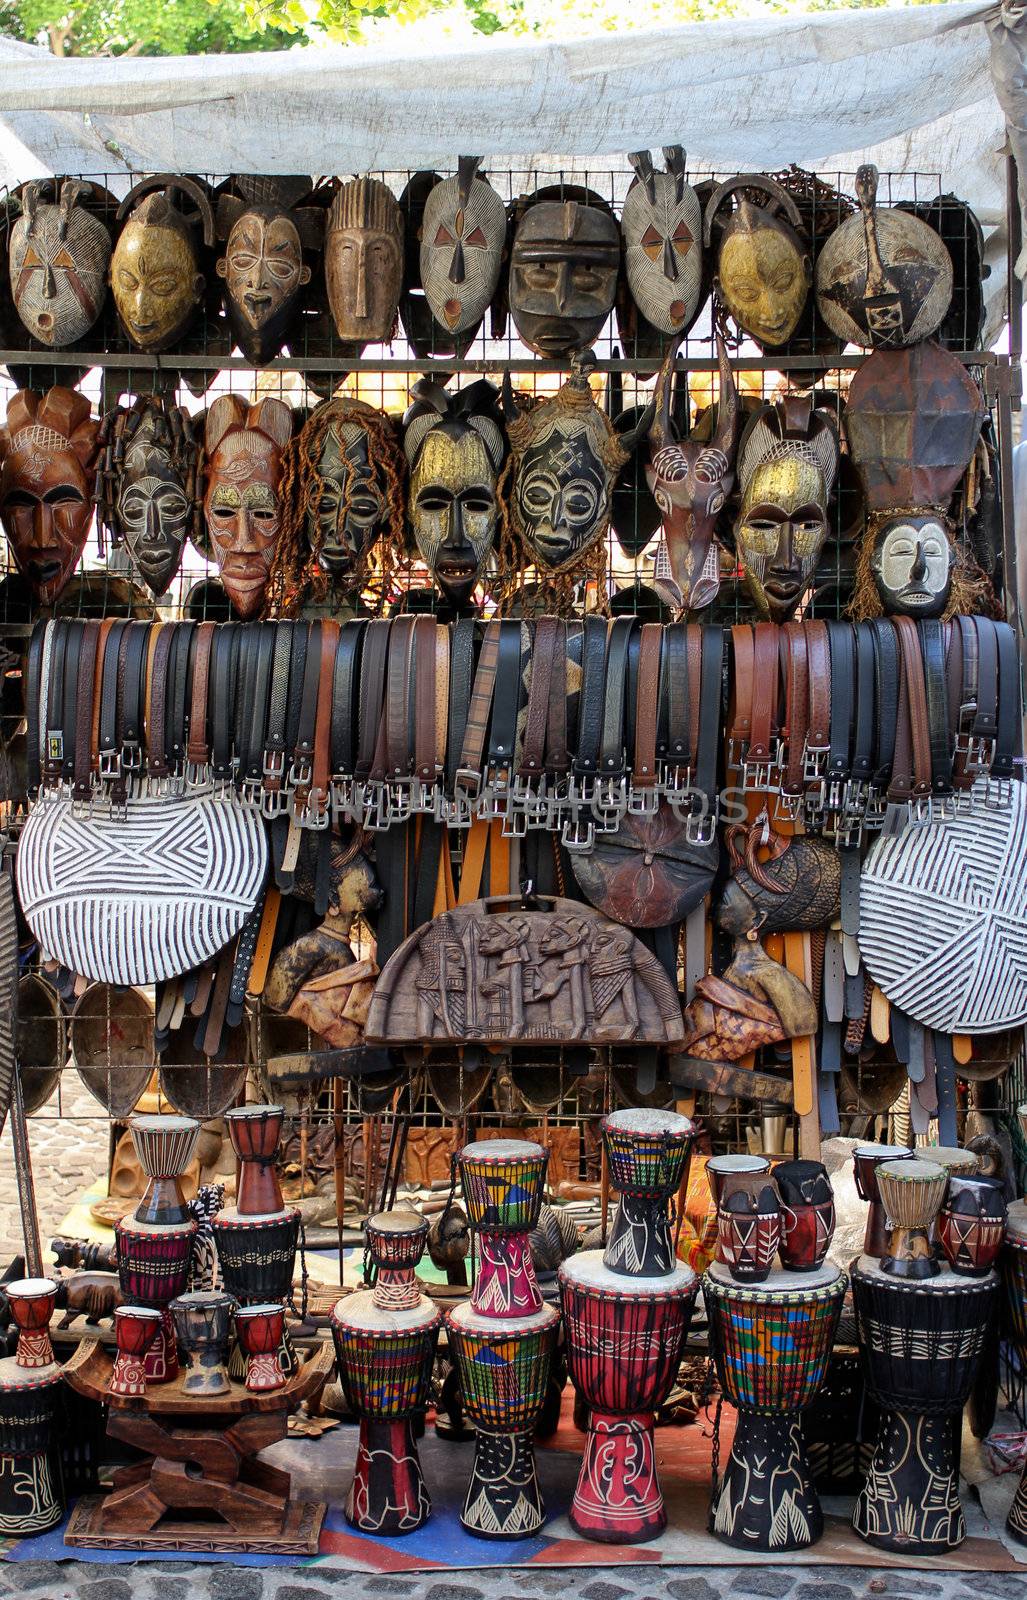 Shop at Greenmarket Square in Cape Town, South Africa